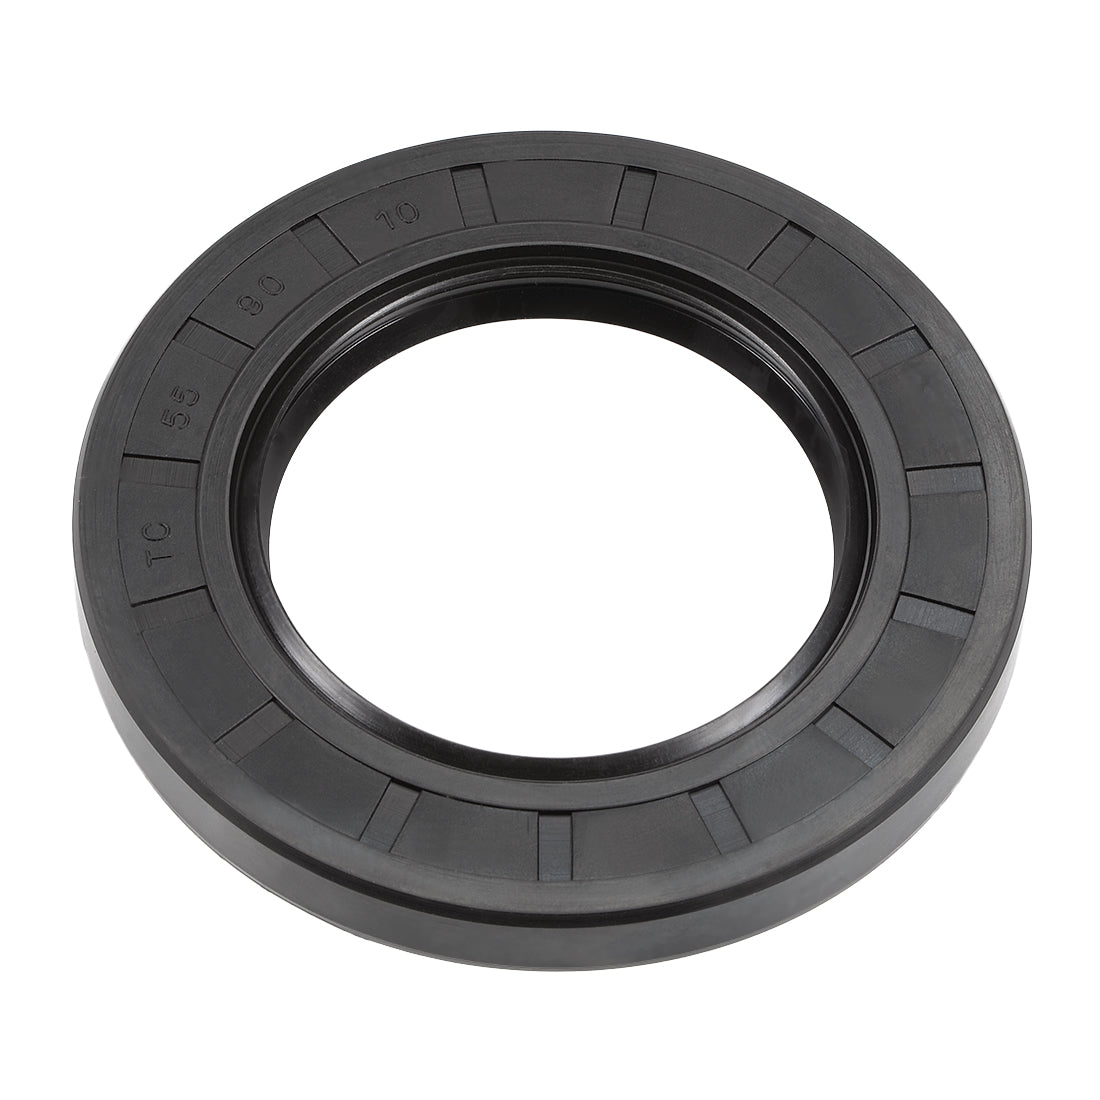 uxcell Uxcell Oil Seal, TC 55mm x 90mm x 10mm, Nitrile Rubber Cover Double Lip